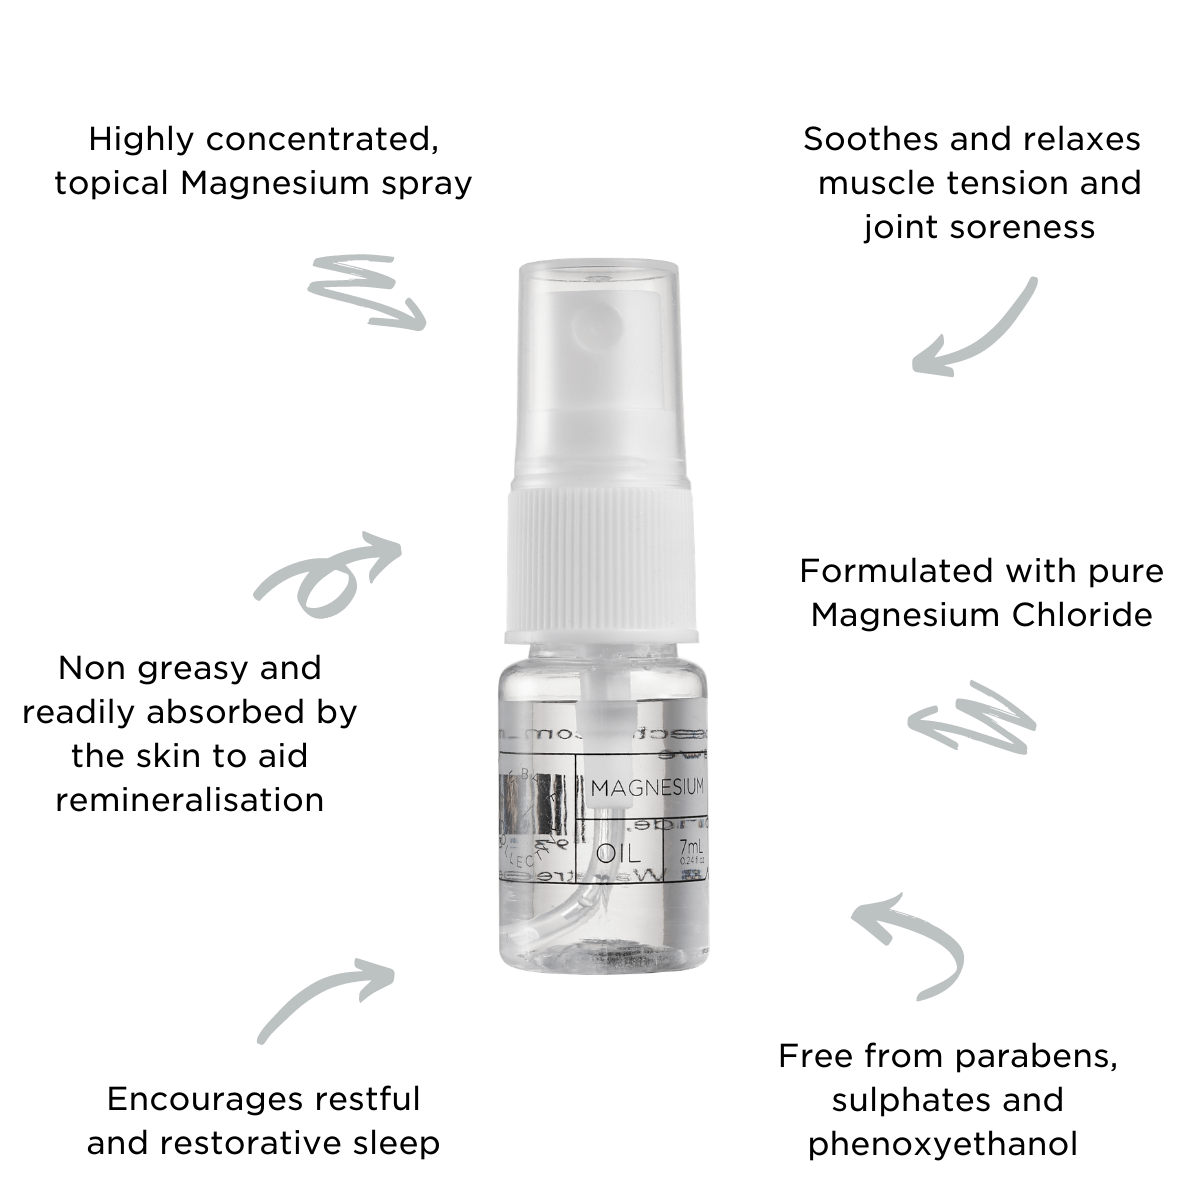 Mini Magnesium Oil Spray 7mL on white background with arrows highlighting features of product.